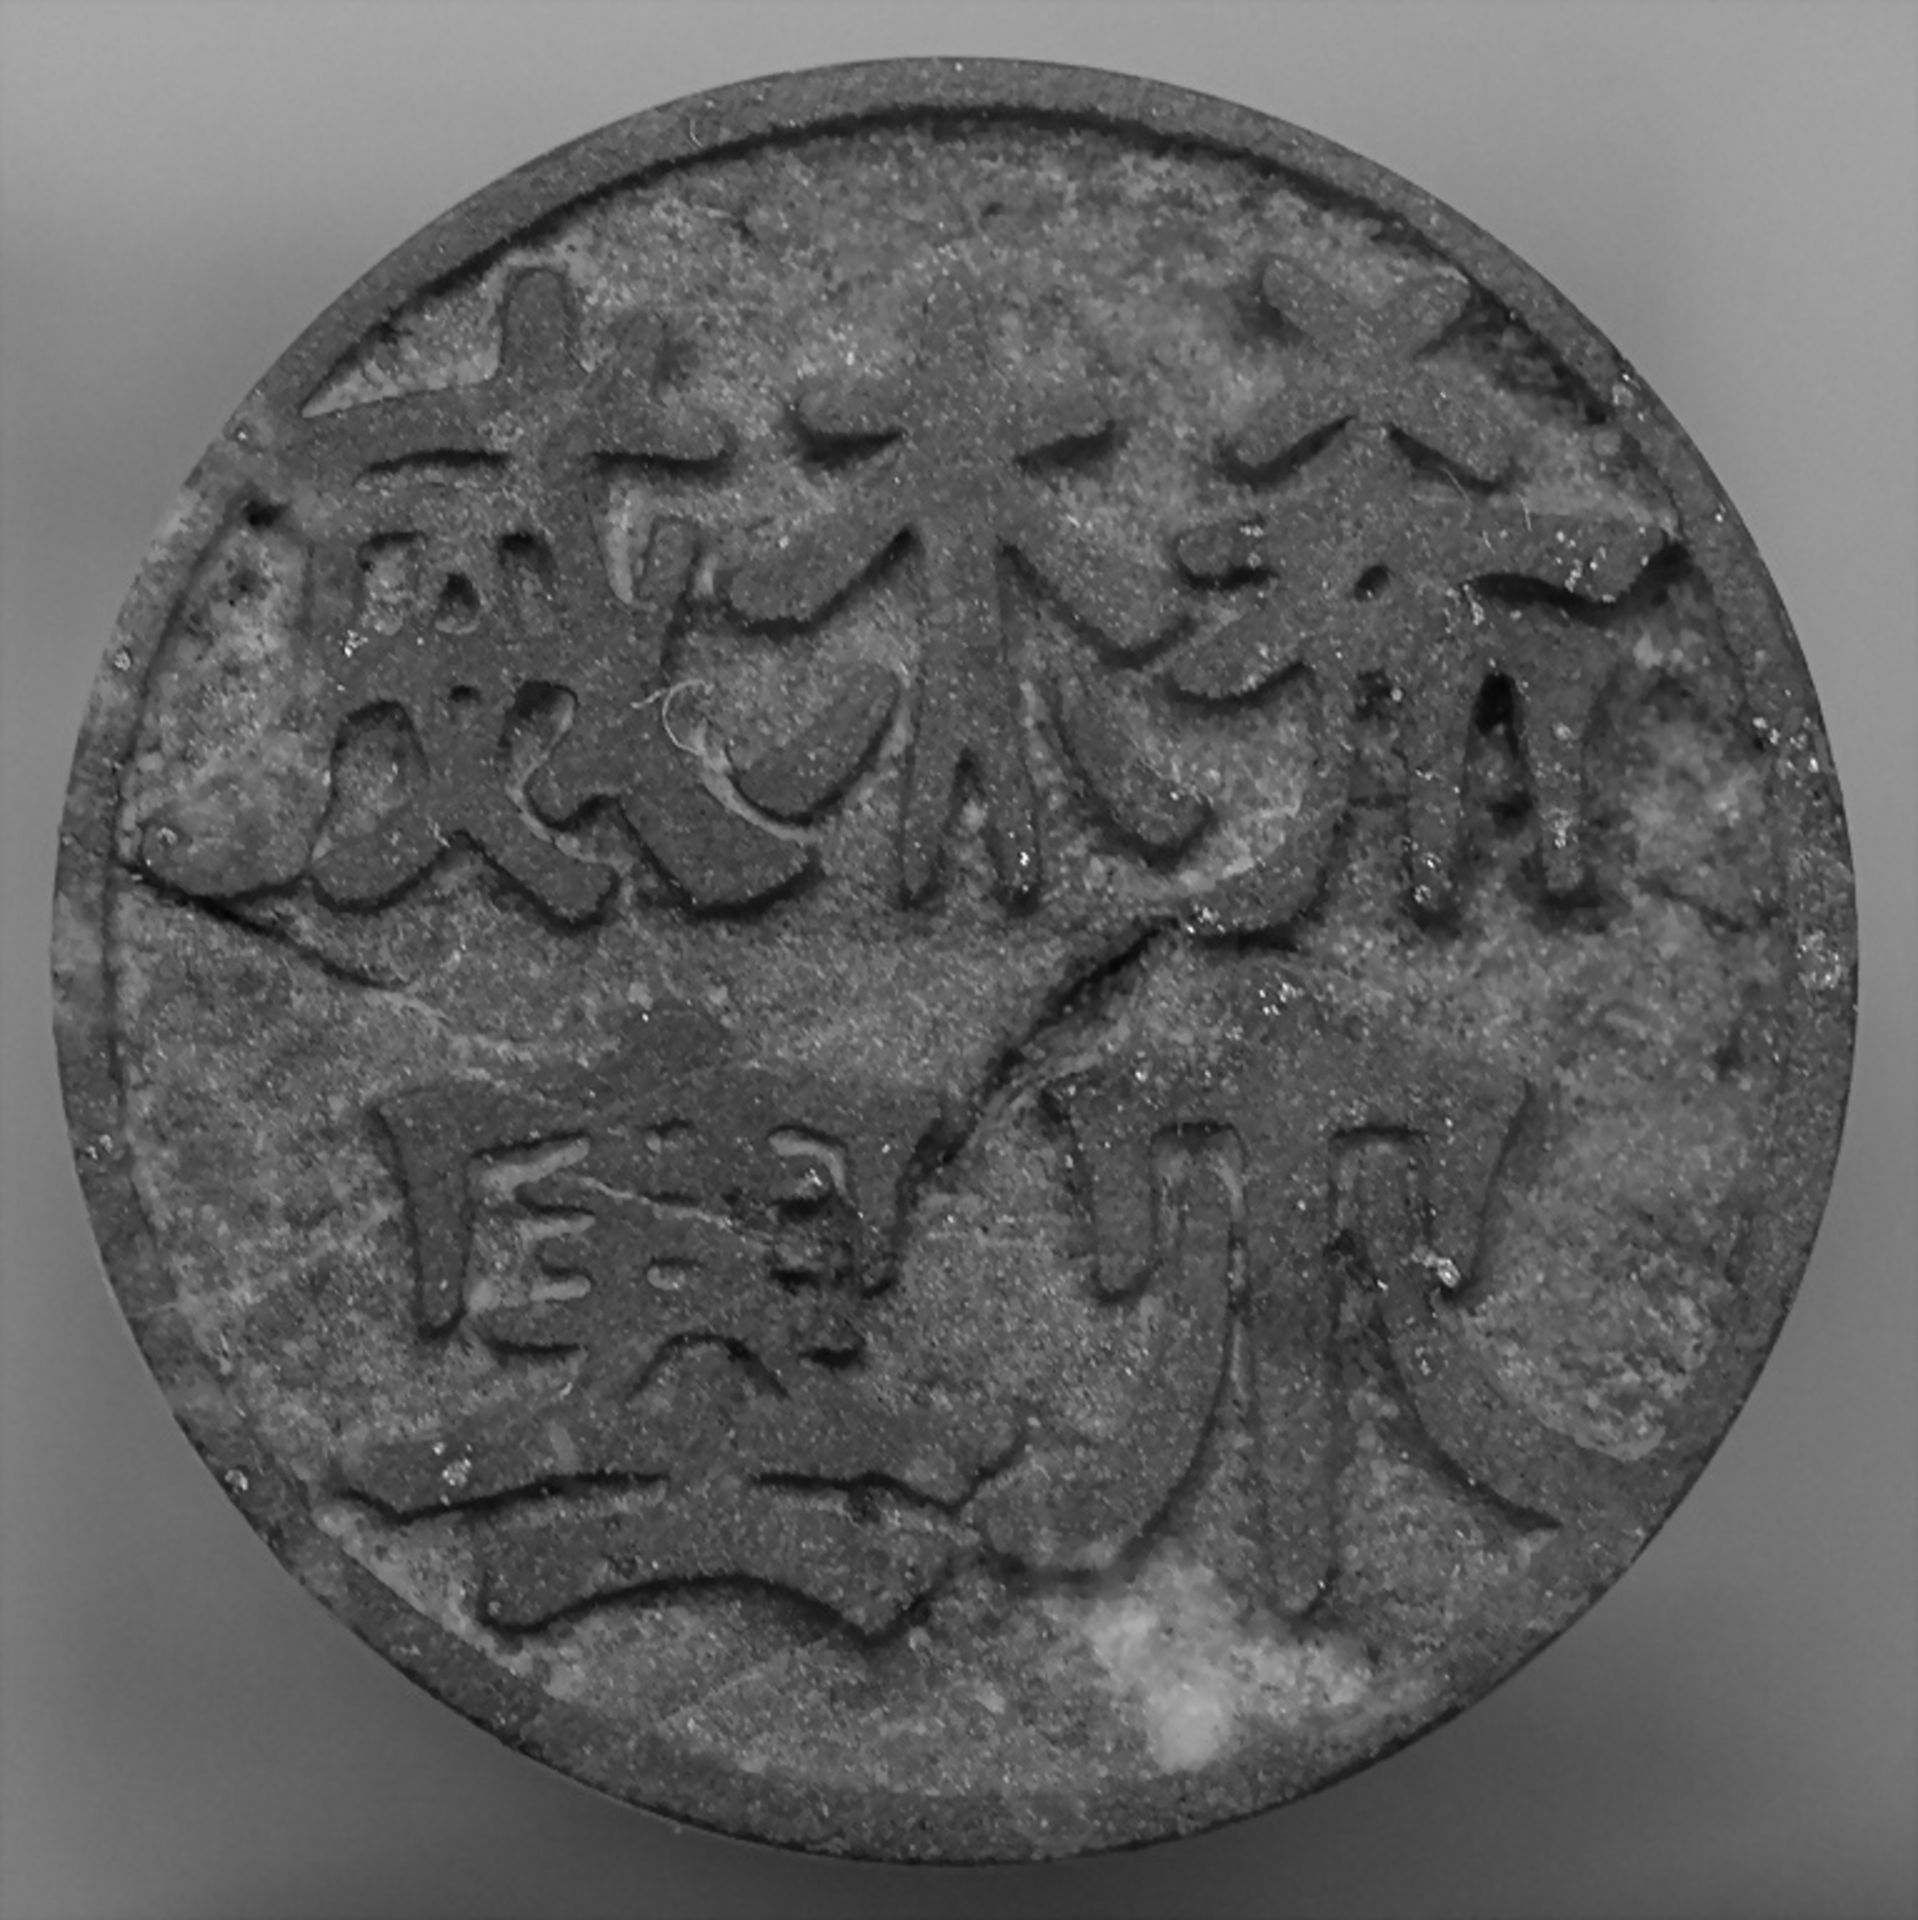 Siegel / A lapis lazuli seal, China, Qing Dynastie (1644-1911) - Image 4 of 4